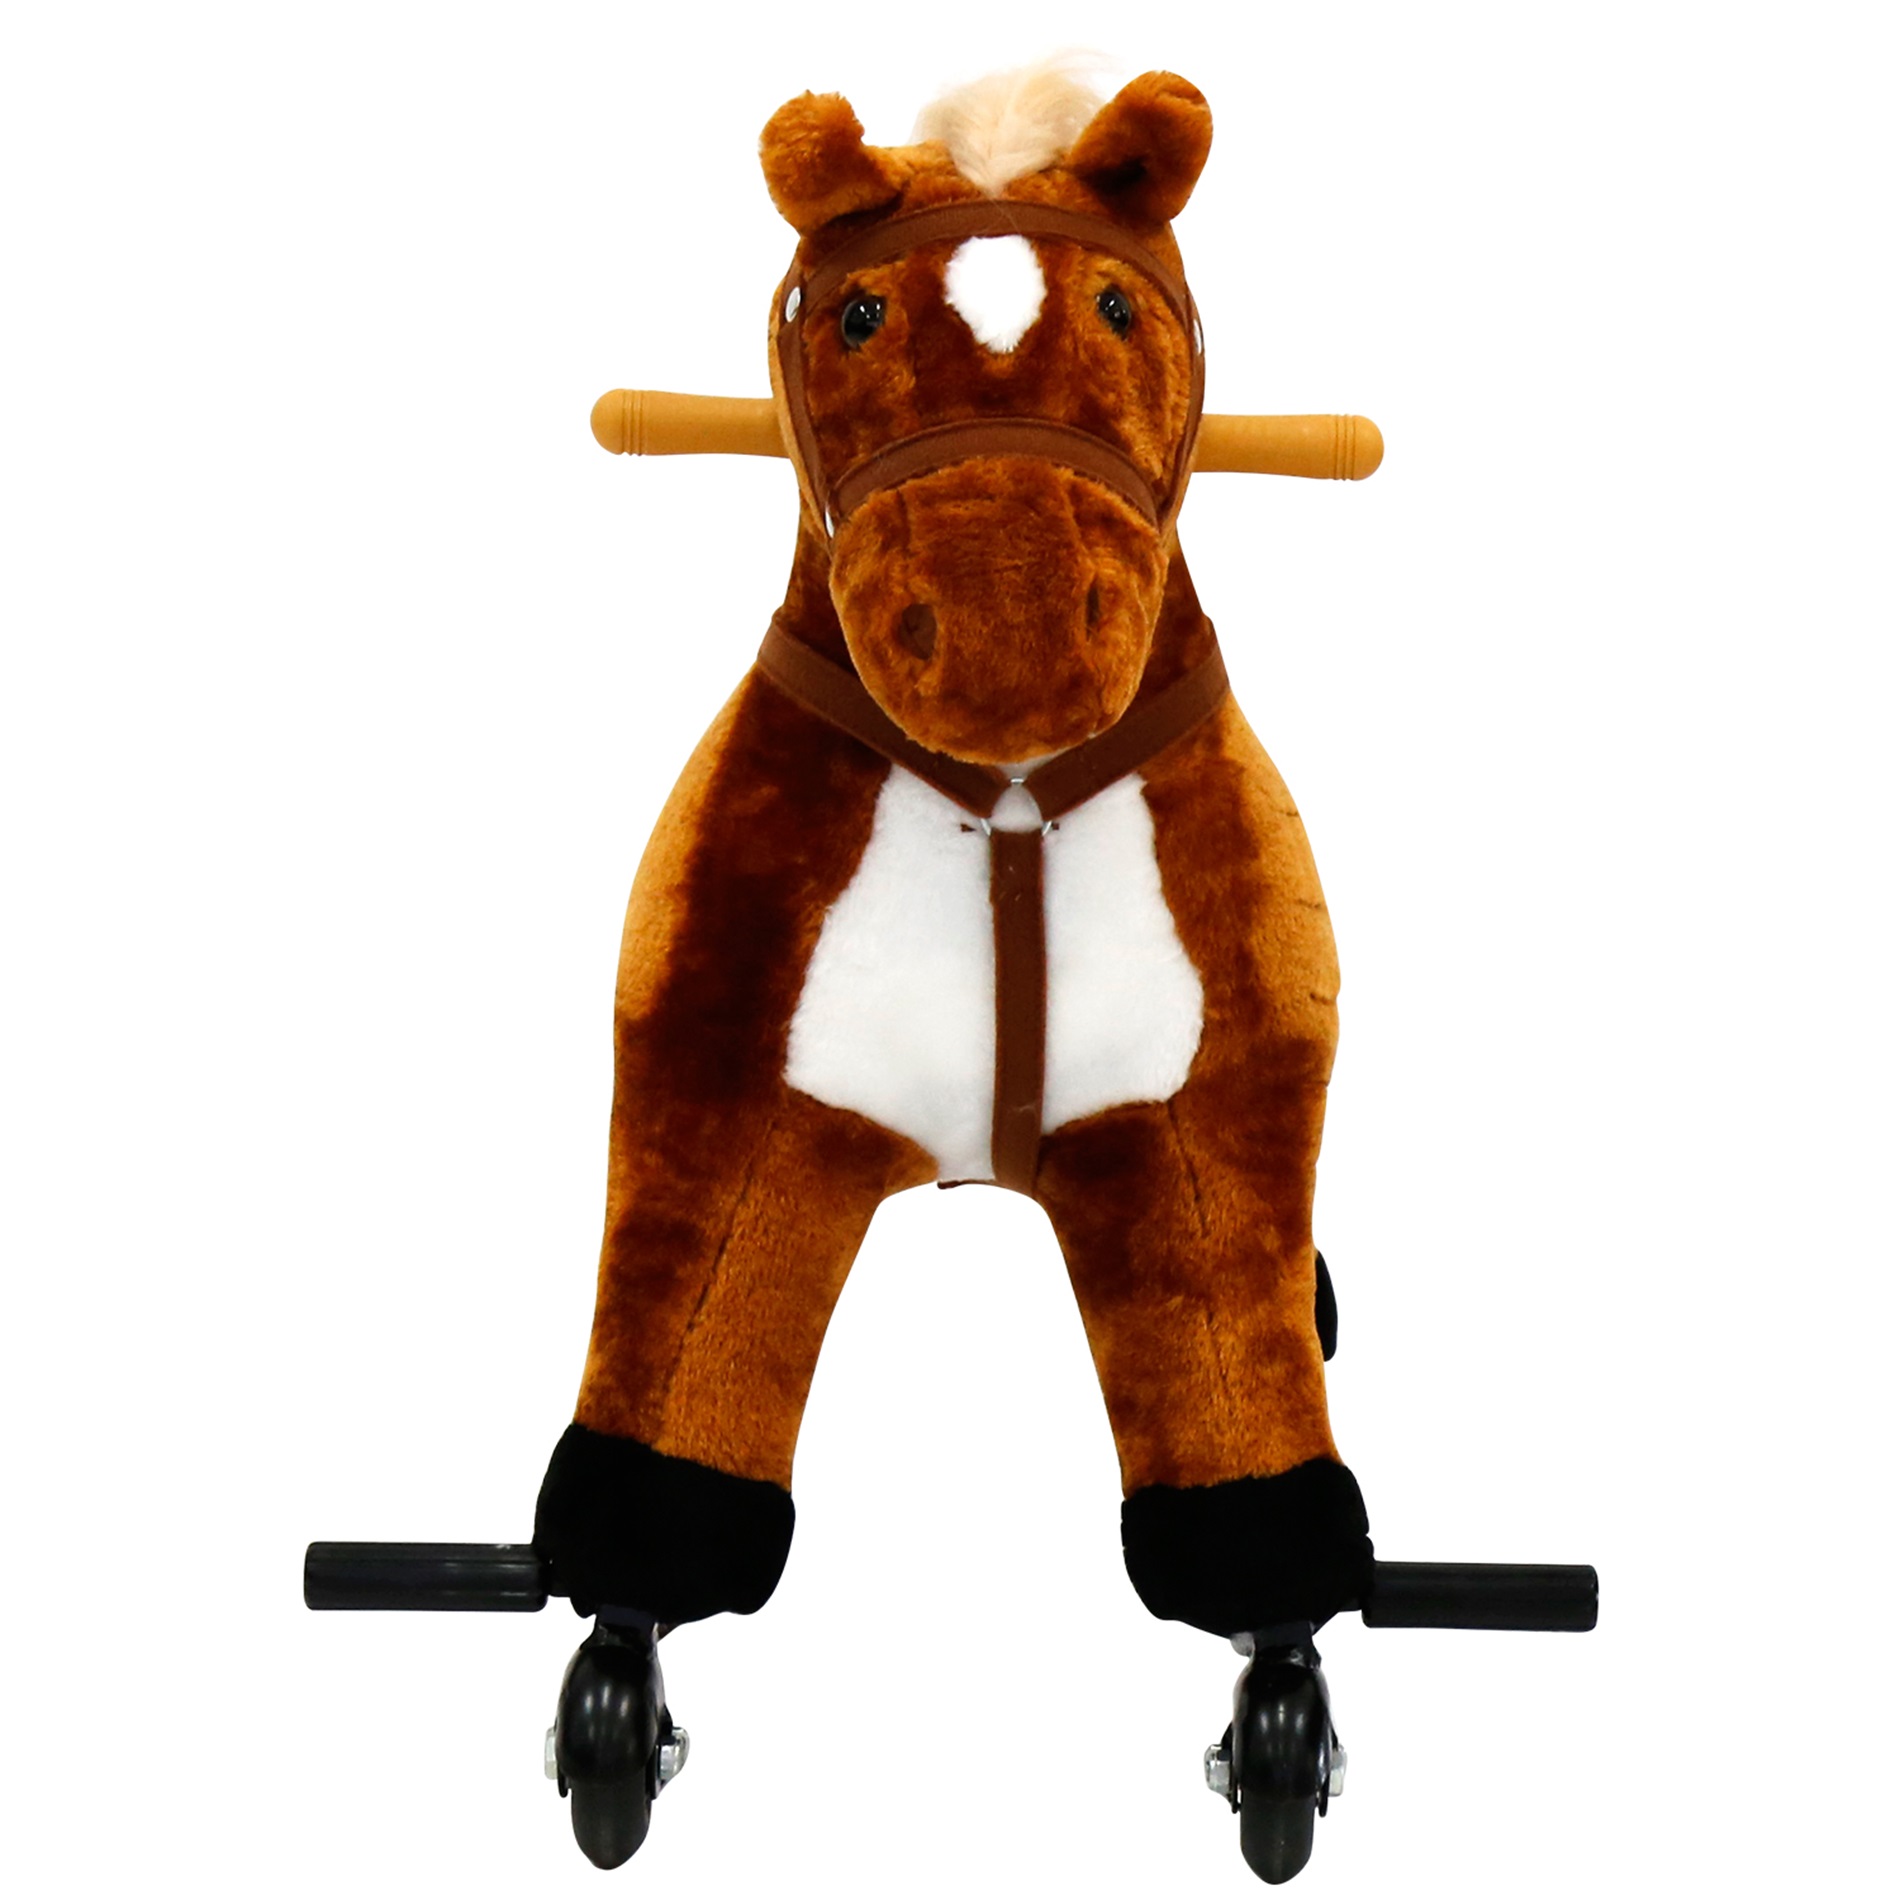 toy horse that walks and neighs